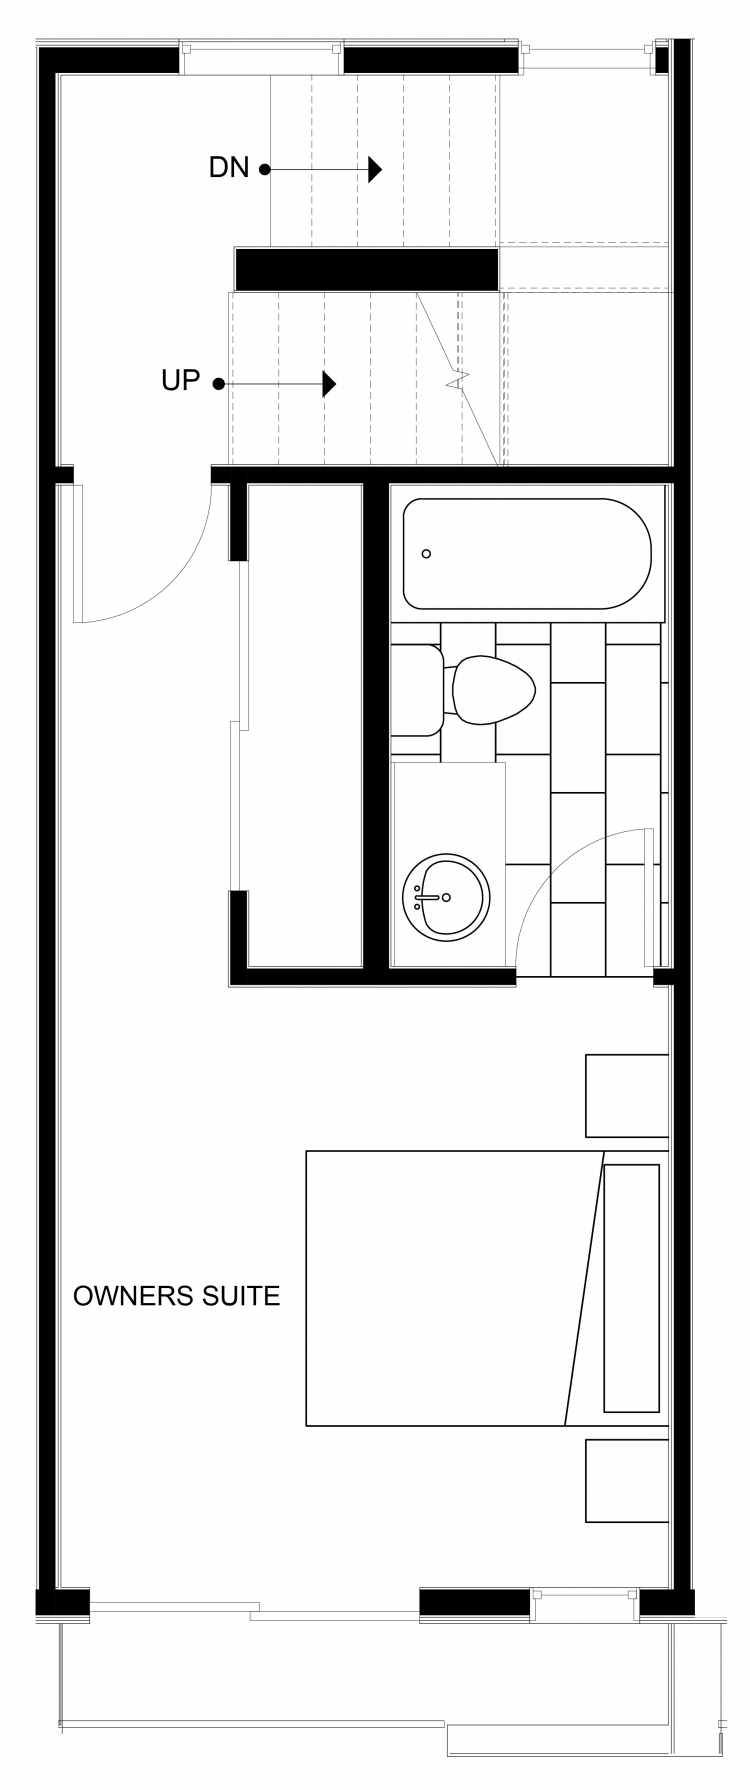 Fourth Floor Plan of 1542 15th Ave E, One of the Grandview Townhomes in Capitol Hill